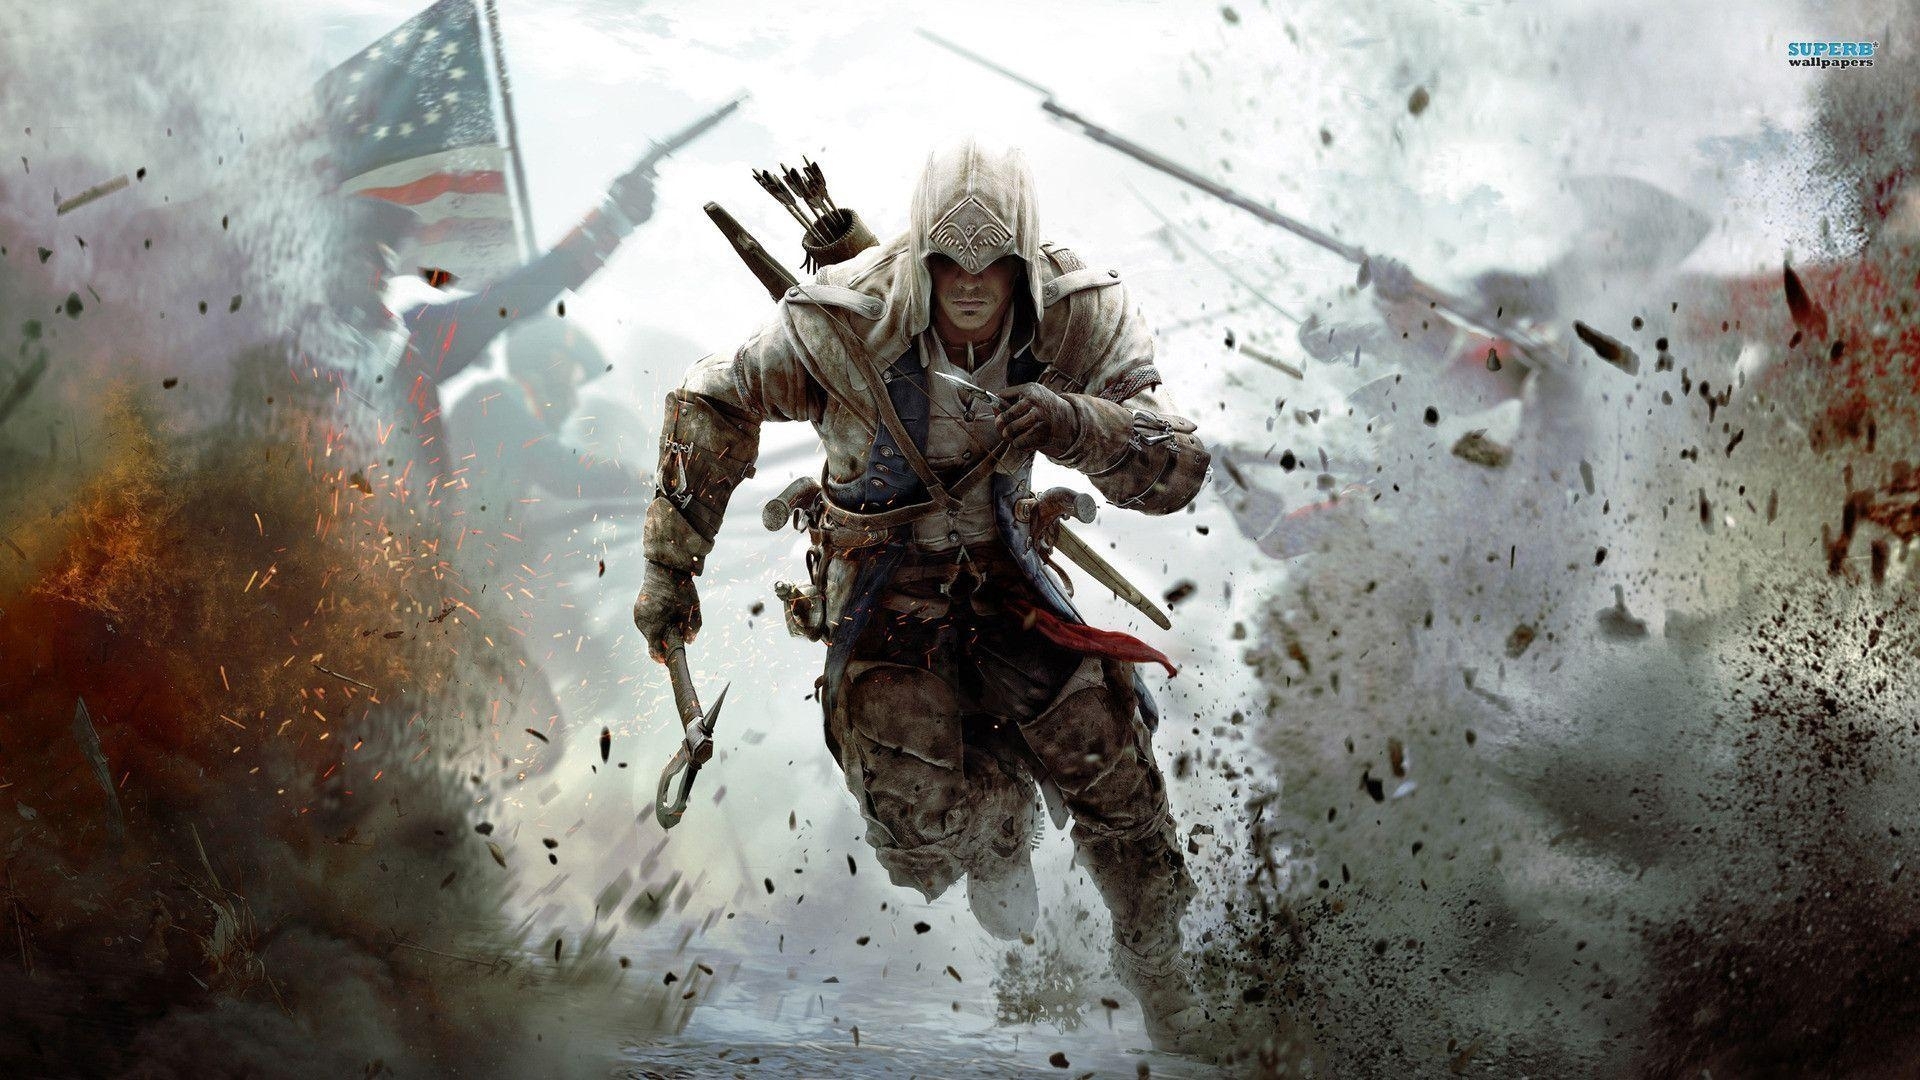 assassin's creed 3 wallpapers hd - wallpaper cave